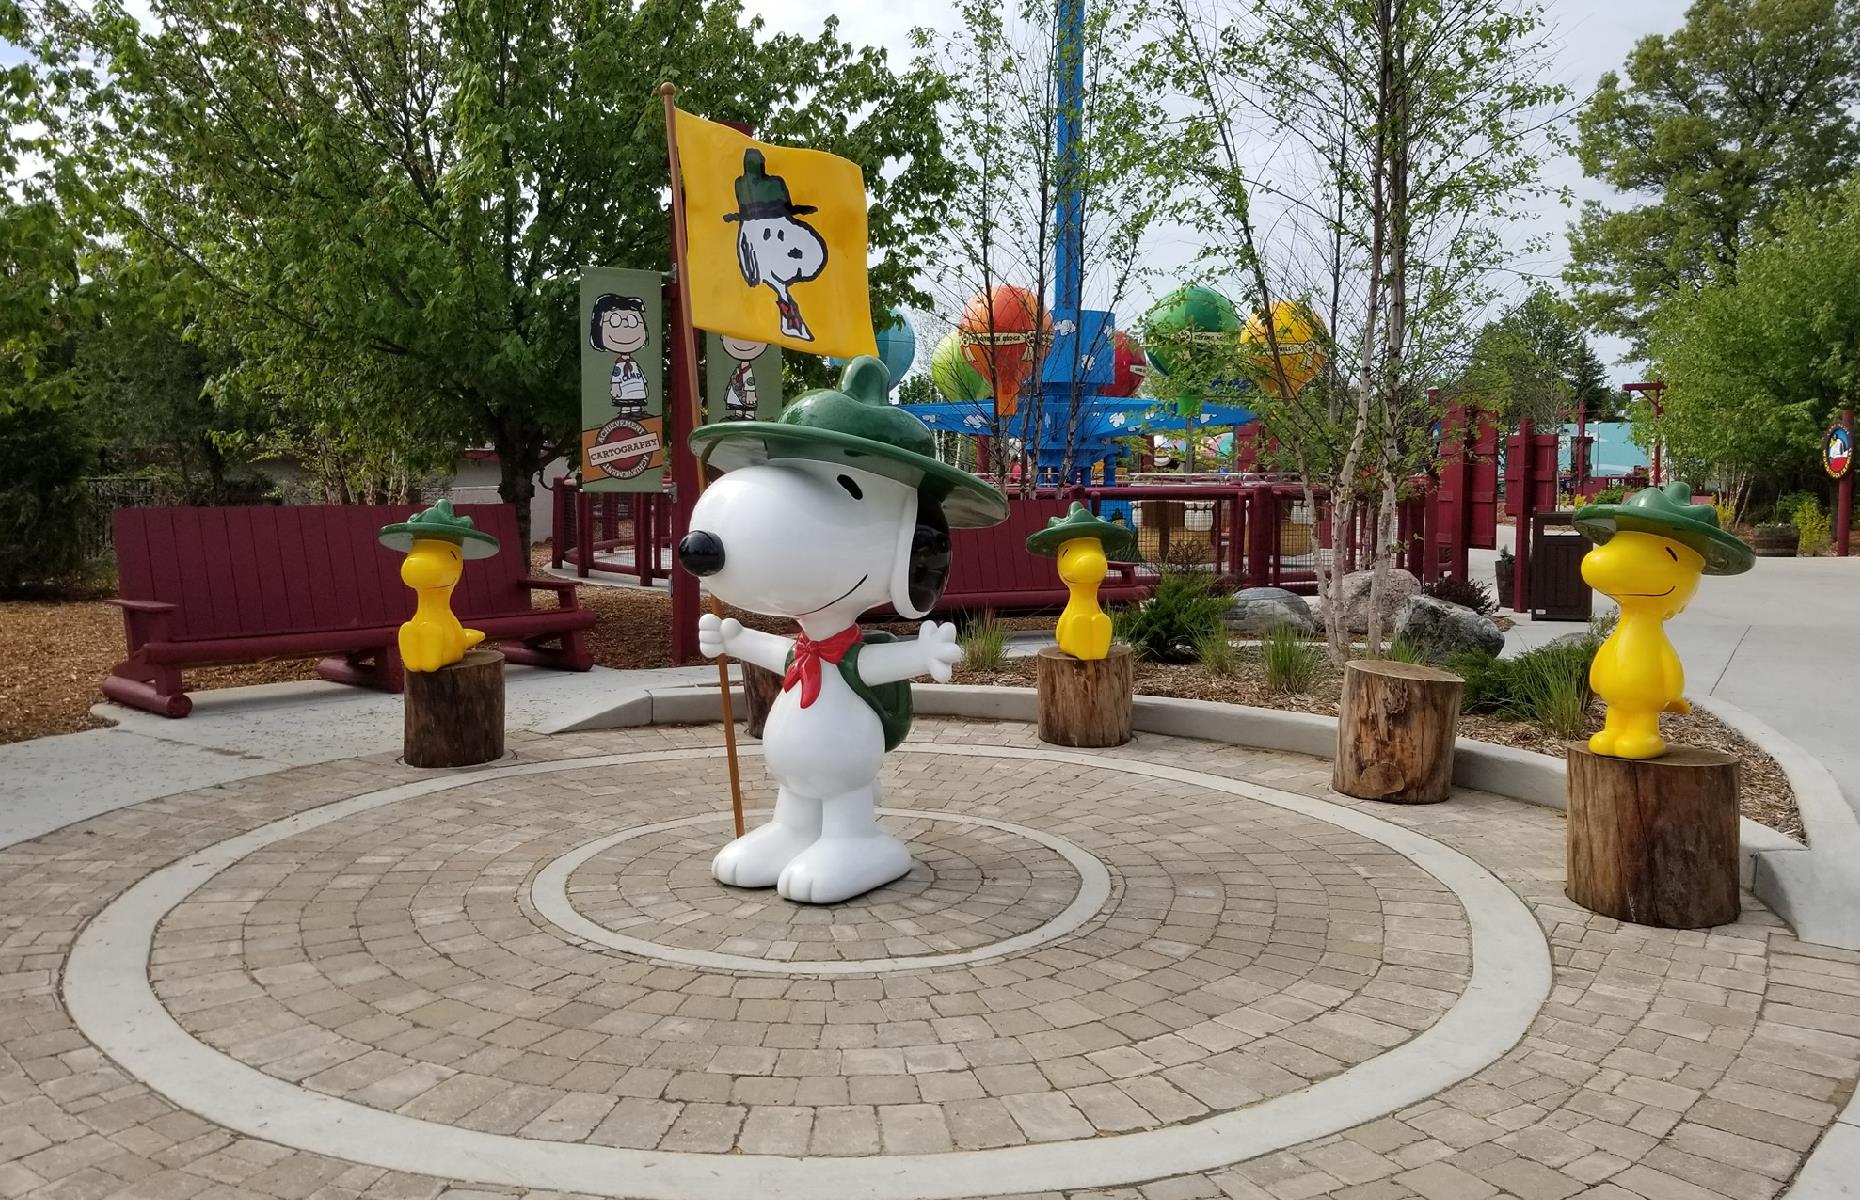 <p><a href="https://www.miadventure.com/">Michigan’s largest theme park</a> unveiled its much-anticipated Camp Snoopy in spring 2021. The area, themed on Charles M. Schulz’s <em>Peanuts</em> cartoon strip and named in honor of its black-and-white beagle, has five rides including the relatively gentle Beagle Scout Lookout, which mimics a trip in a colorful hot air balloon. The seasonal park, which closes for winter, also has a range of thrill rides and family fun from Swan Boats to slides and splash pools in WildWater Adventure Waterpark.</p>